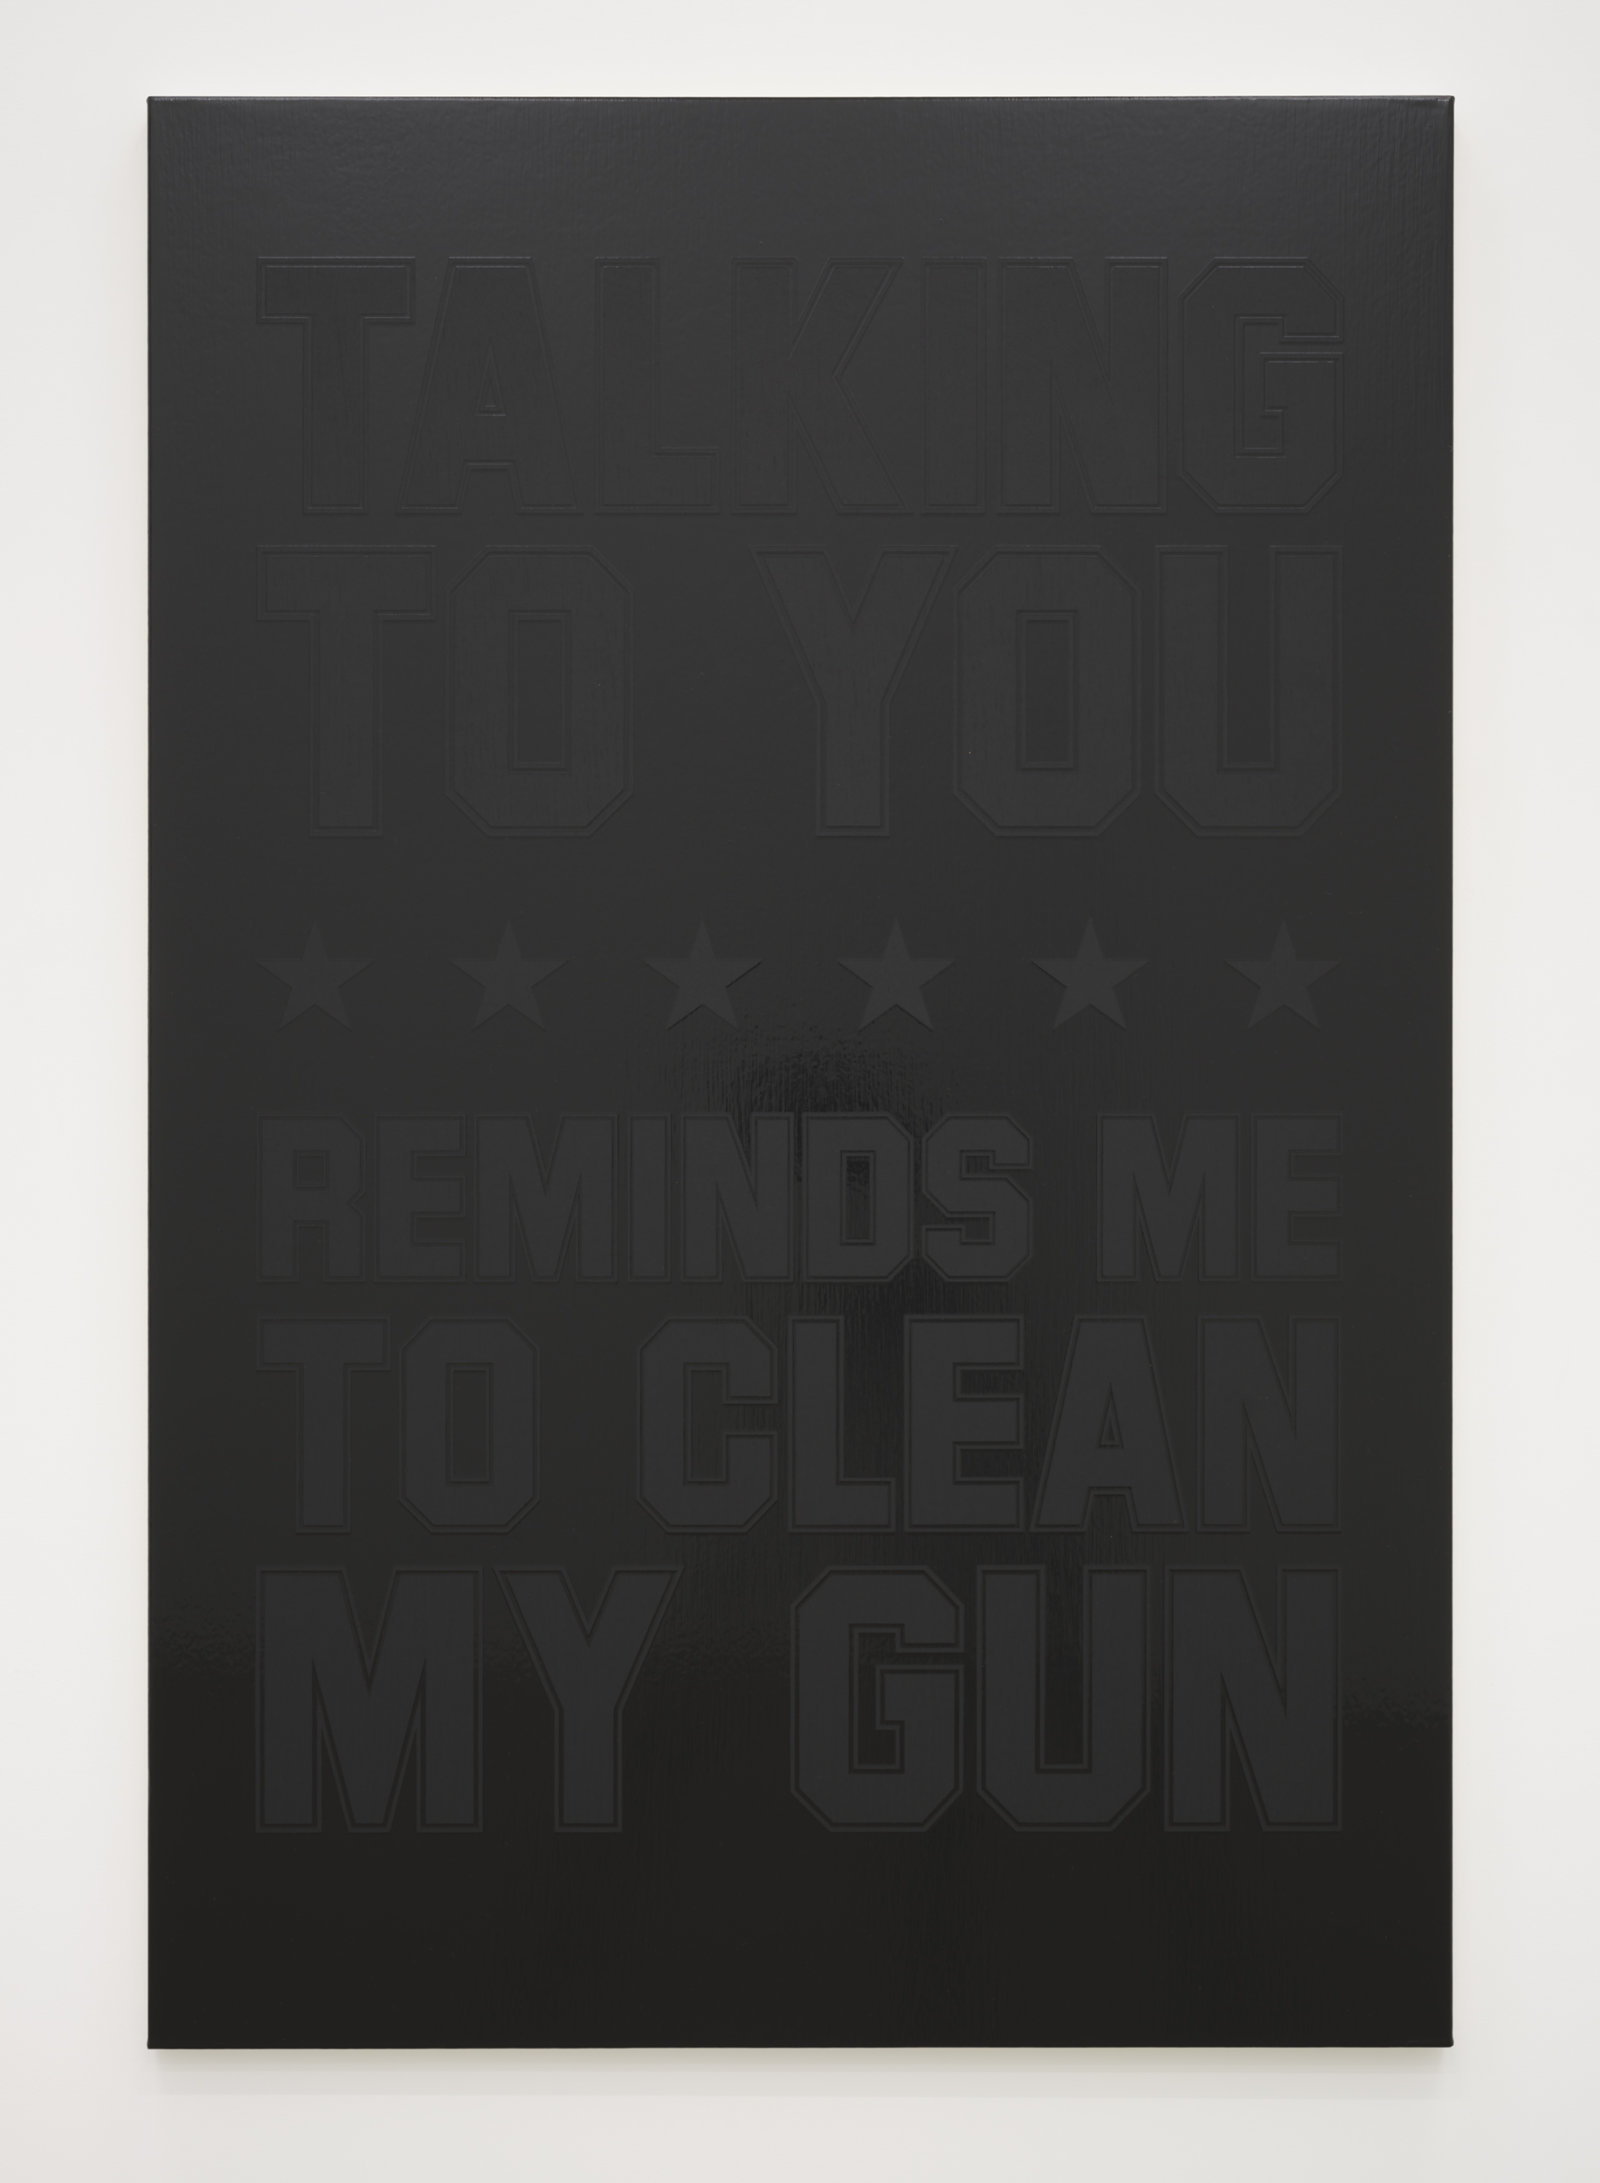 Ron Terada, Talking To You Reminds Me To Clean My Gun, 2023, acrylic on canvas, 54 x 36 in. (137 x 91 cm)